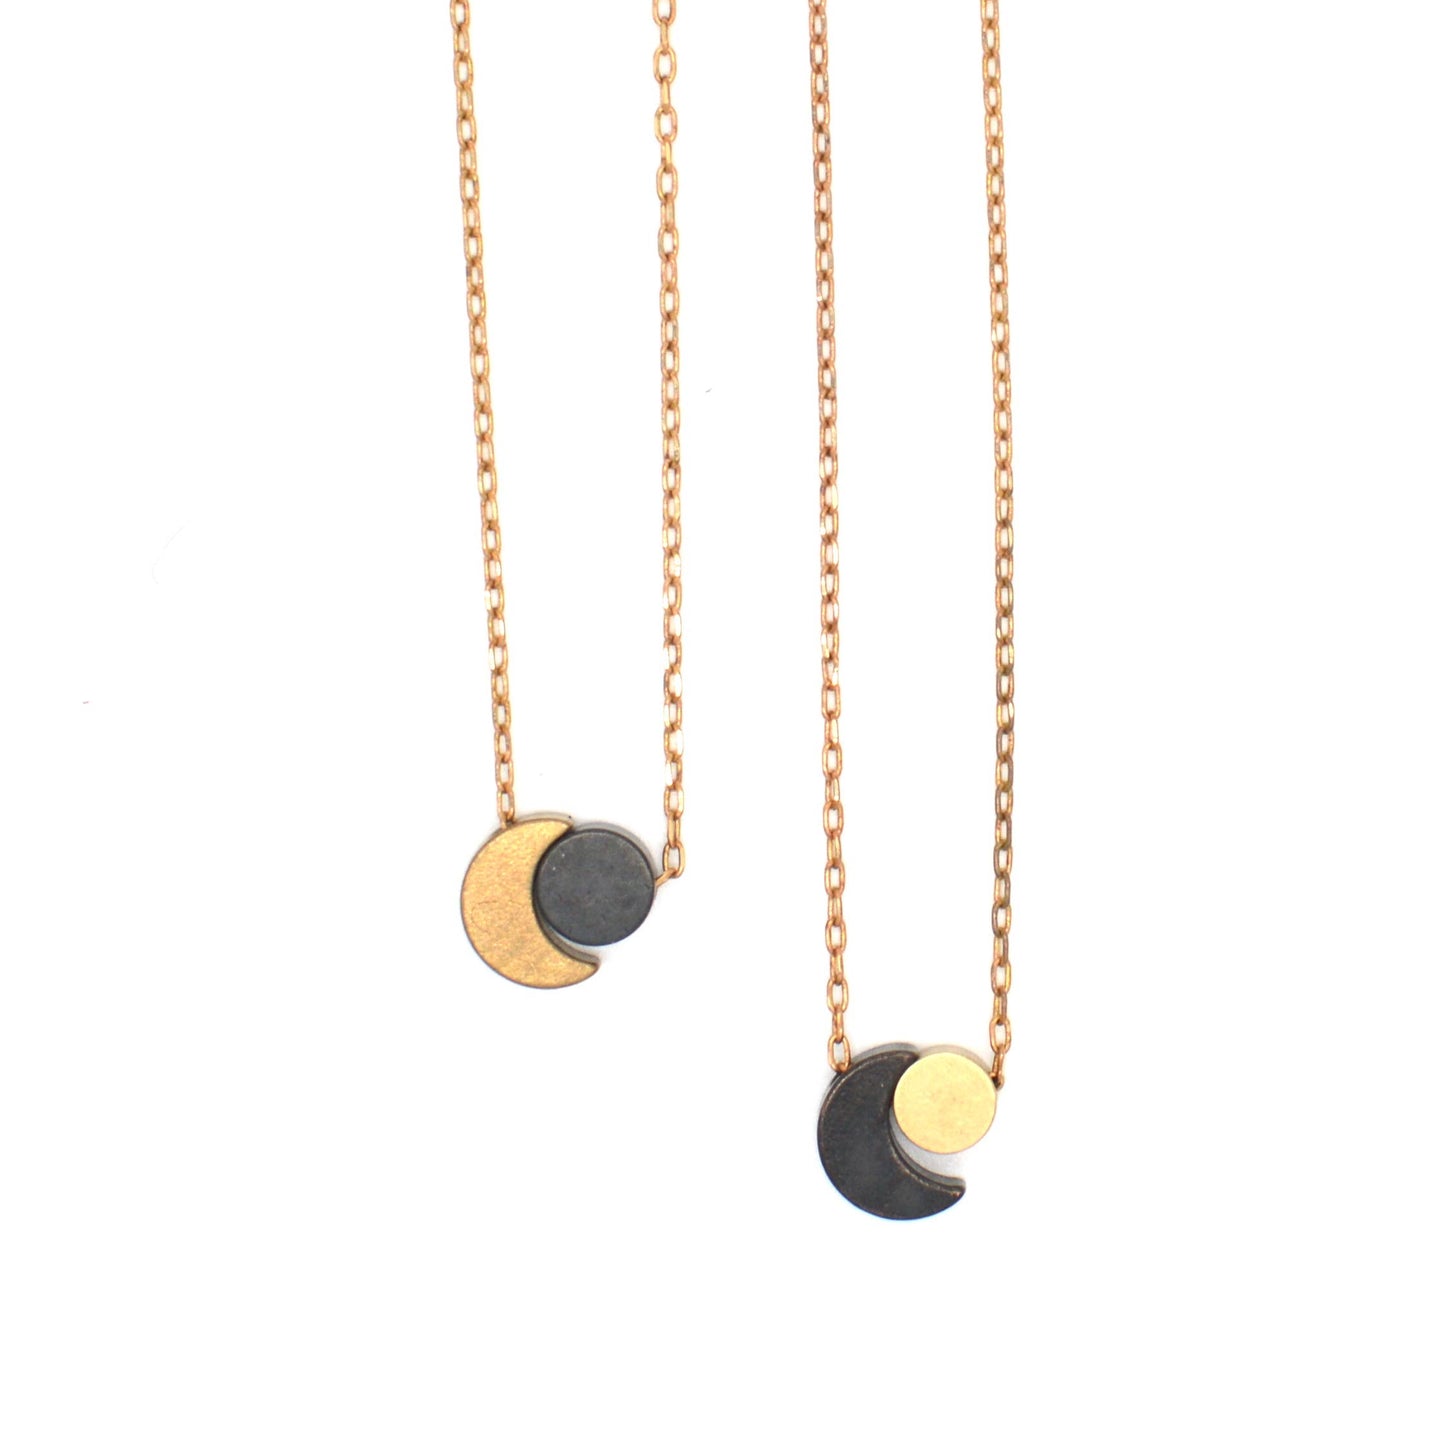 The Luminaries BFF Necklace Set